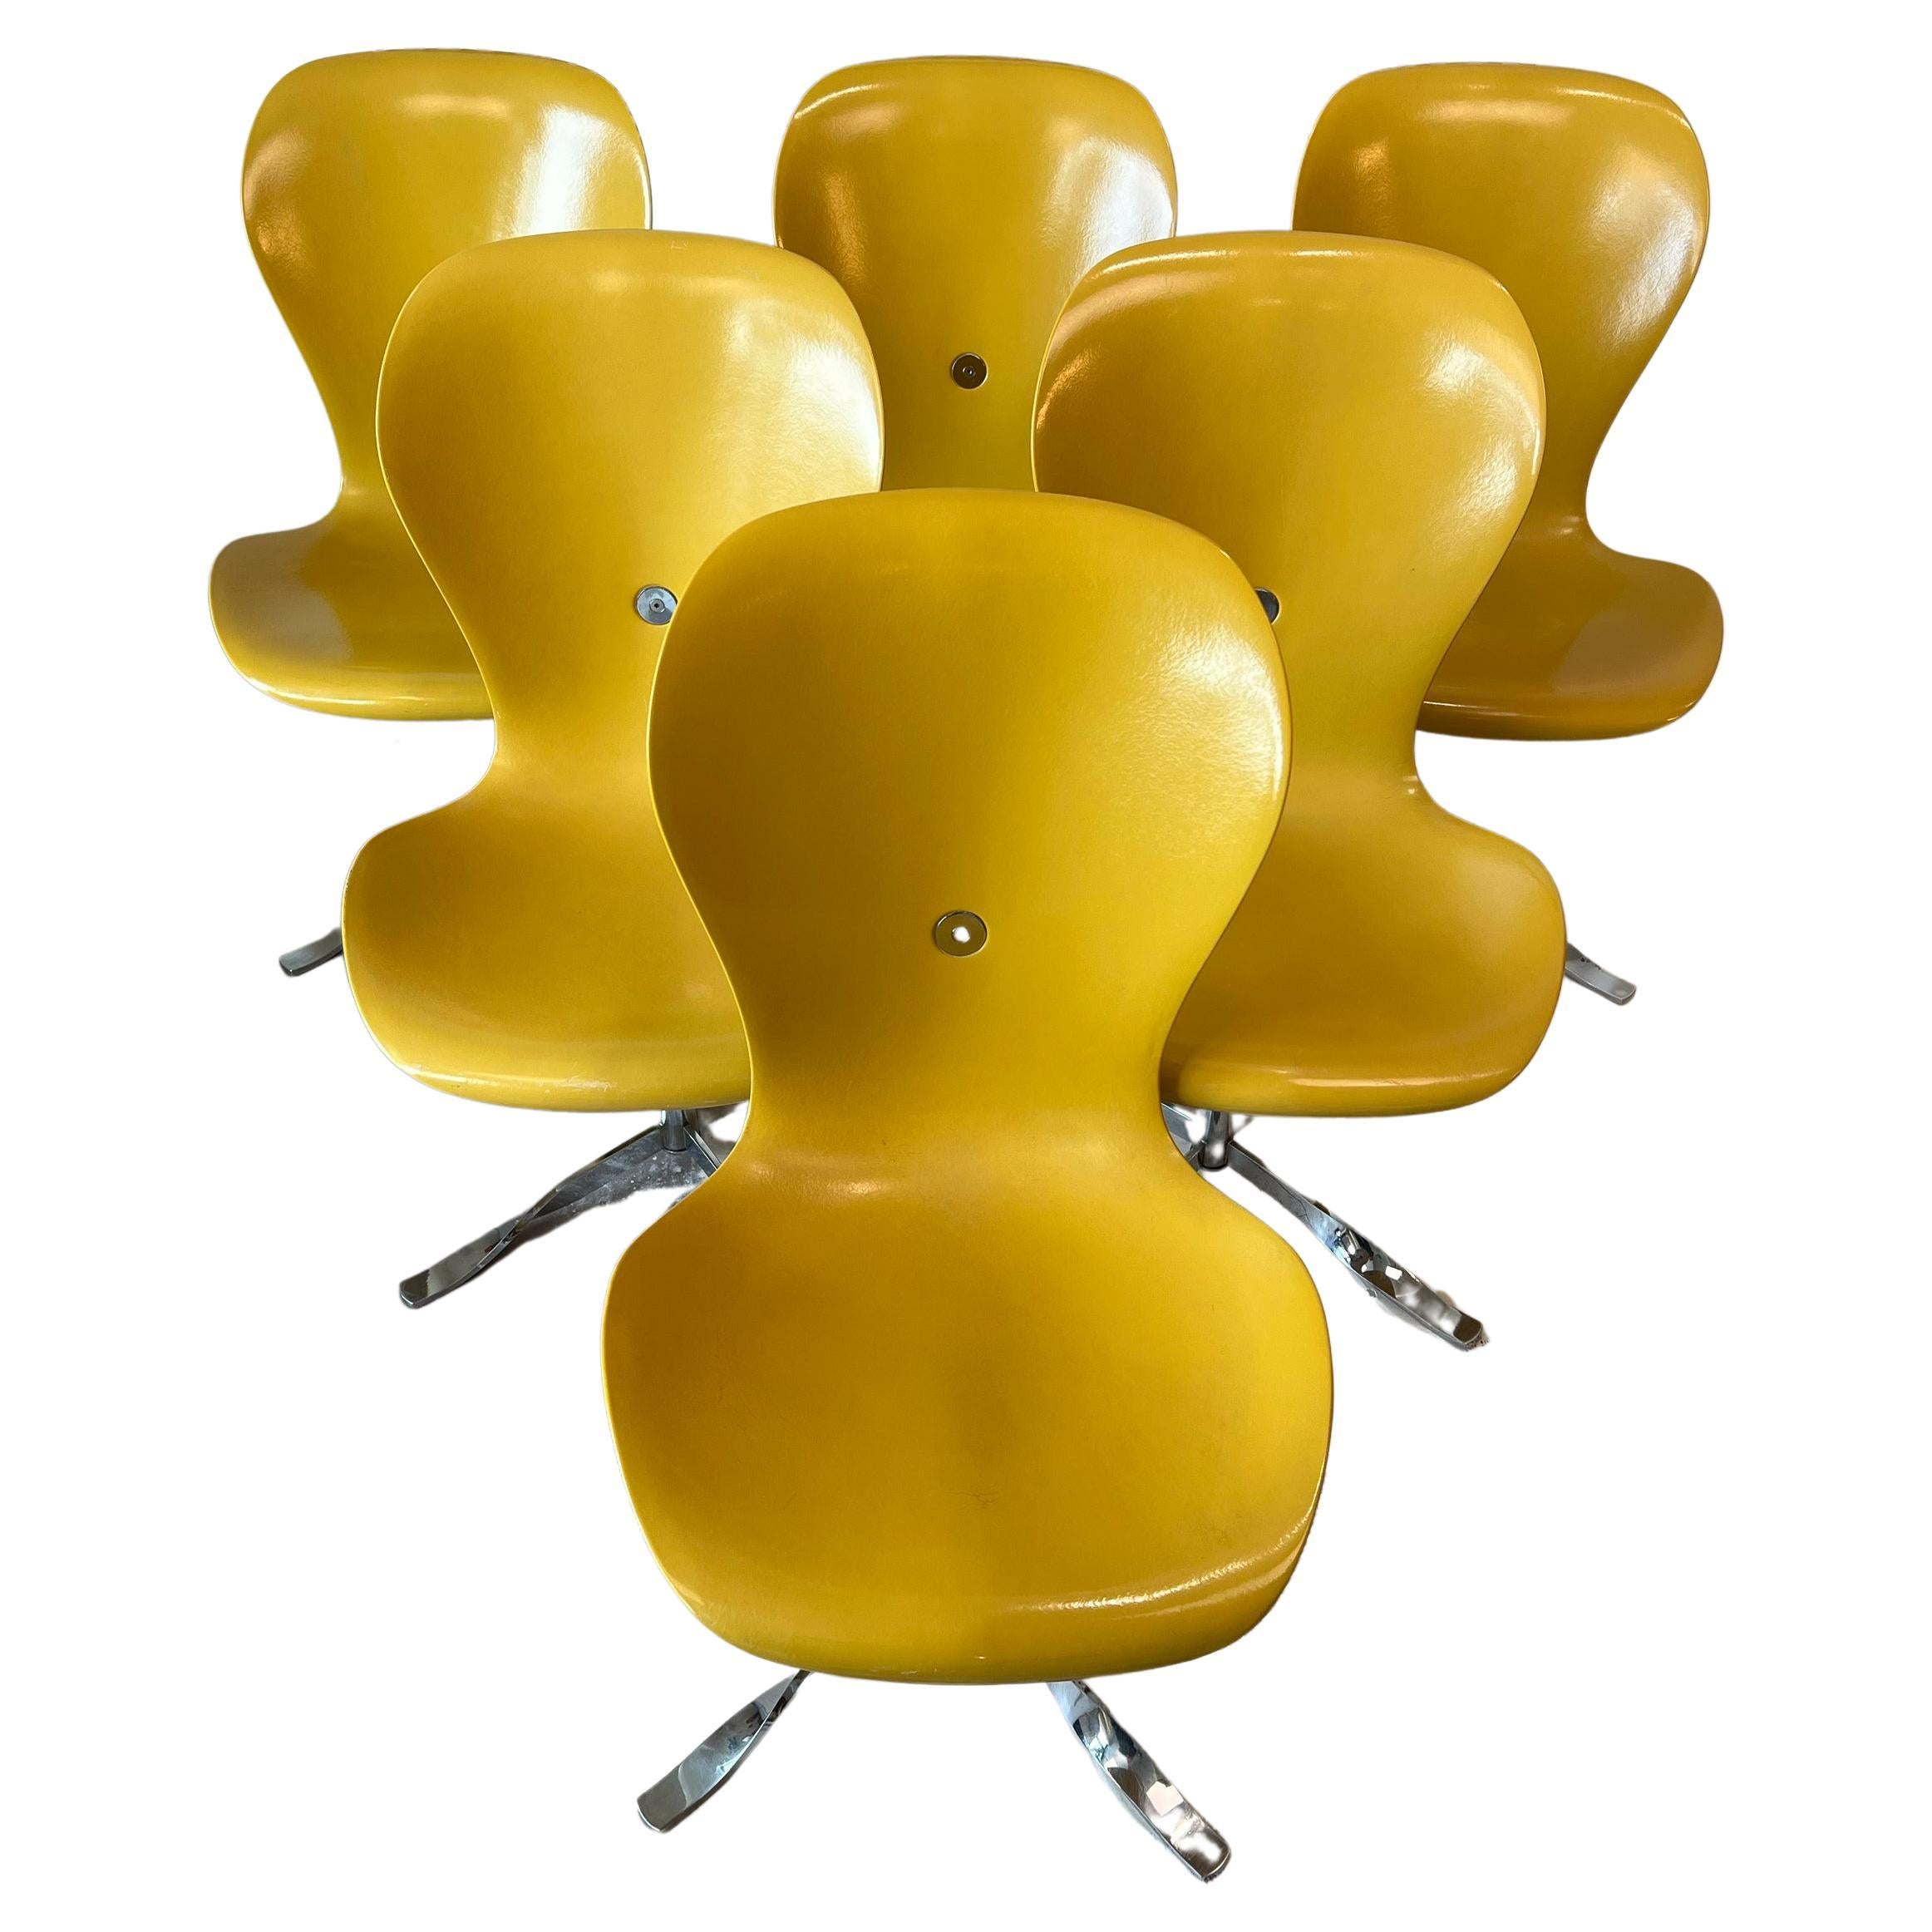 Set of 6 Vintage Ion Chairs by Gideon Kramer for American Desk Co.